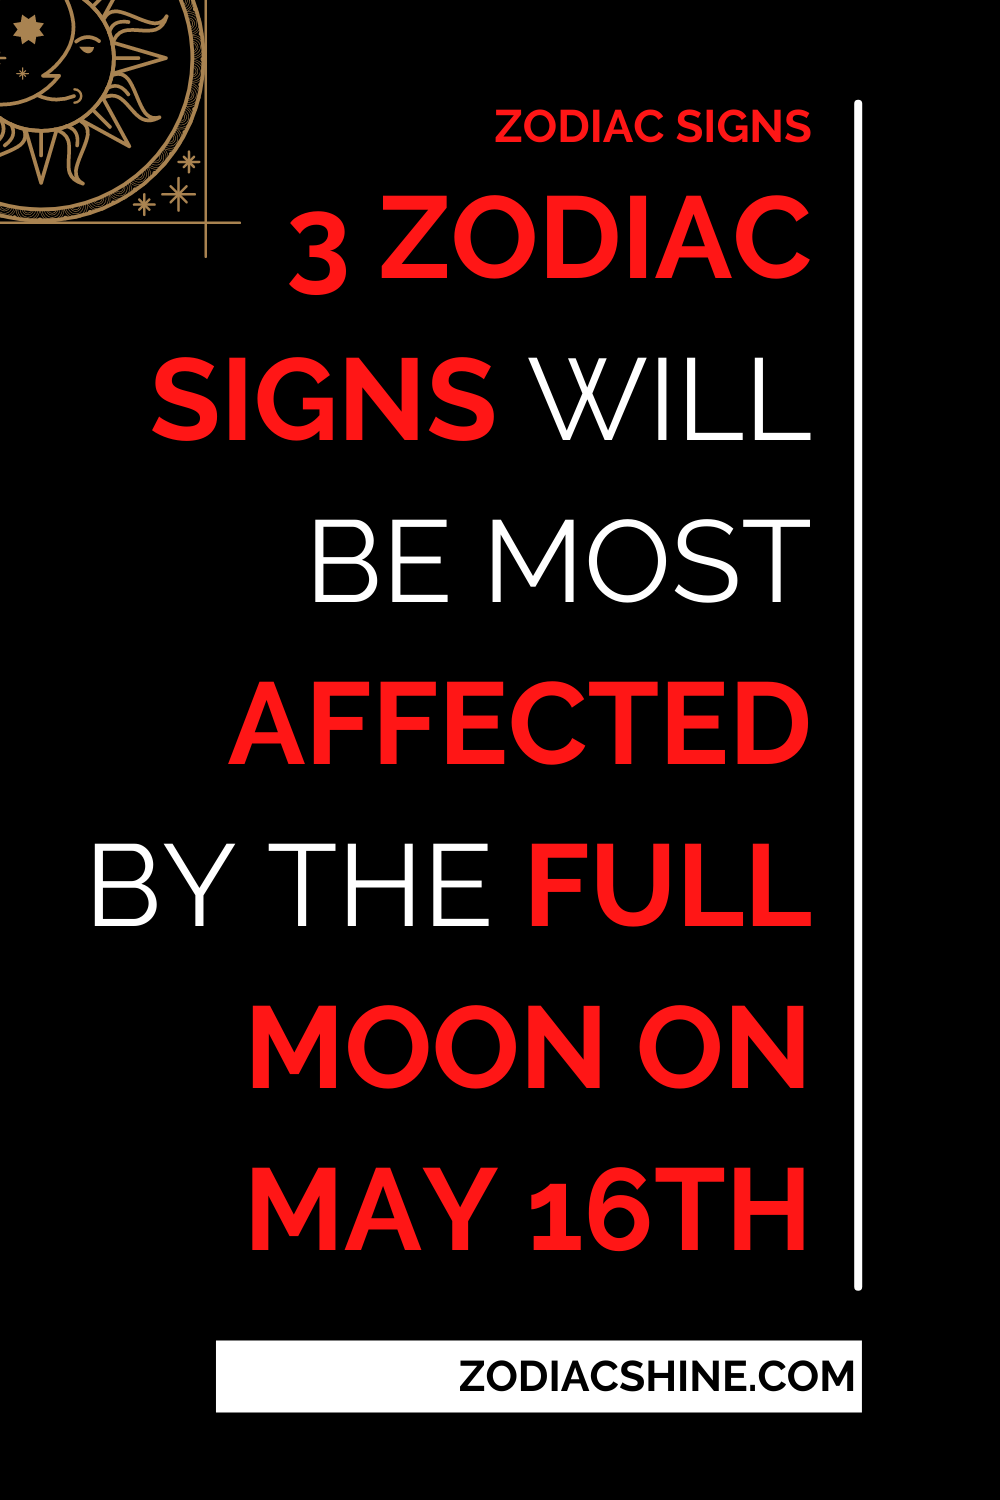 3 Zodiac Signs Will Be Most Affected By The Full Moon On May 16th